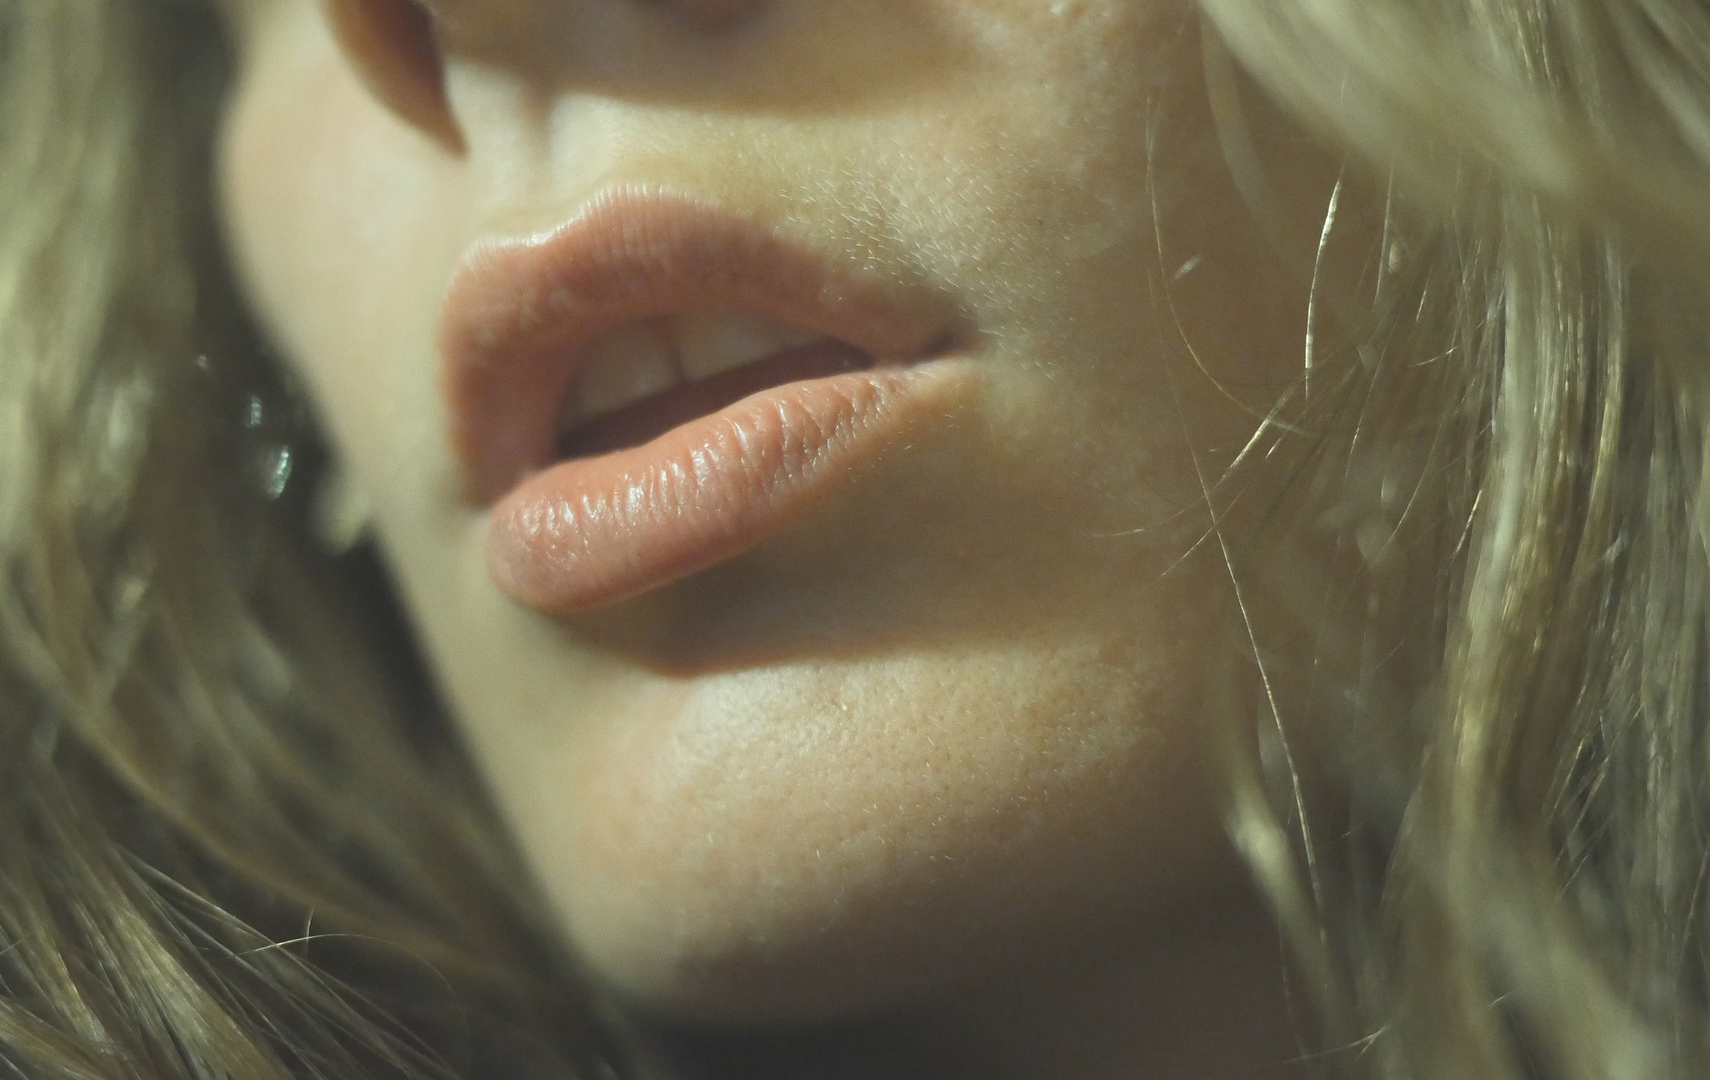 A close up on a woman's mouth and cheeks